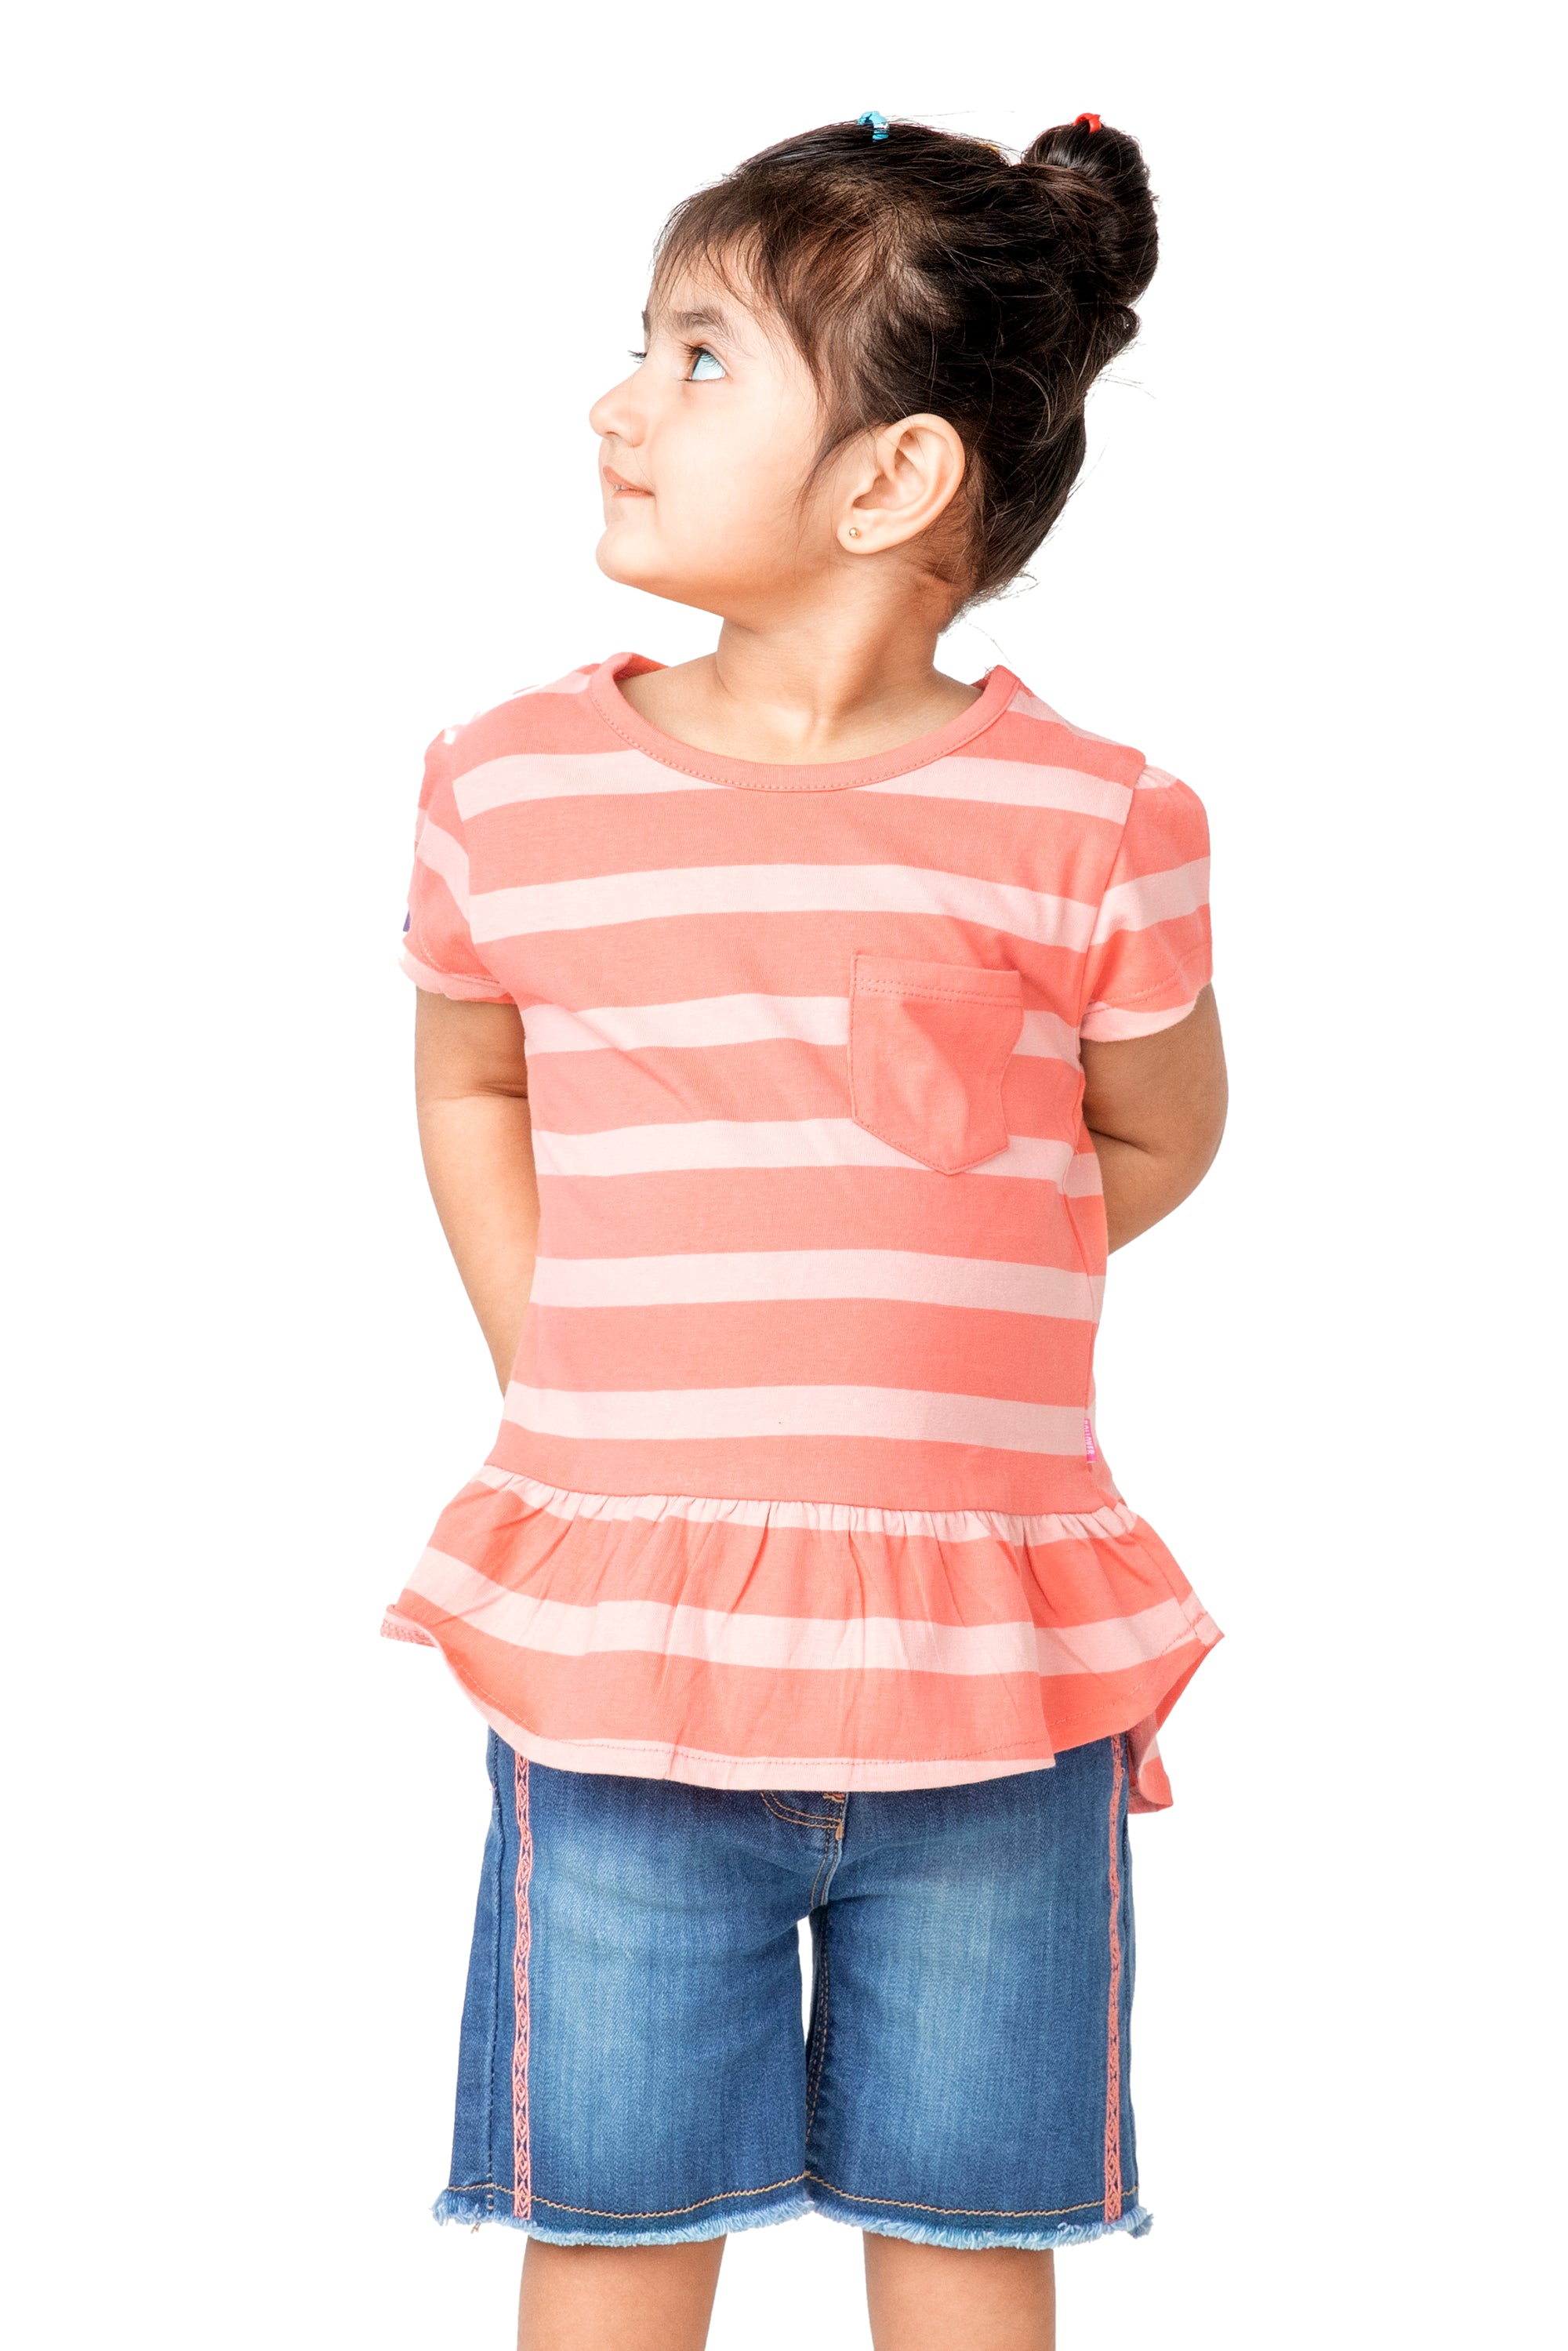 Short-sleeved Tunic in Dusty Pink and Salmon Pink